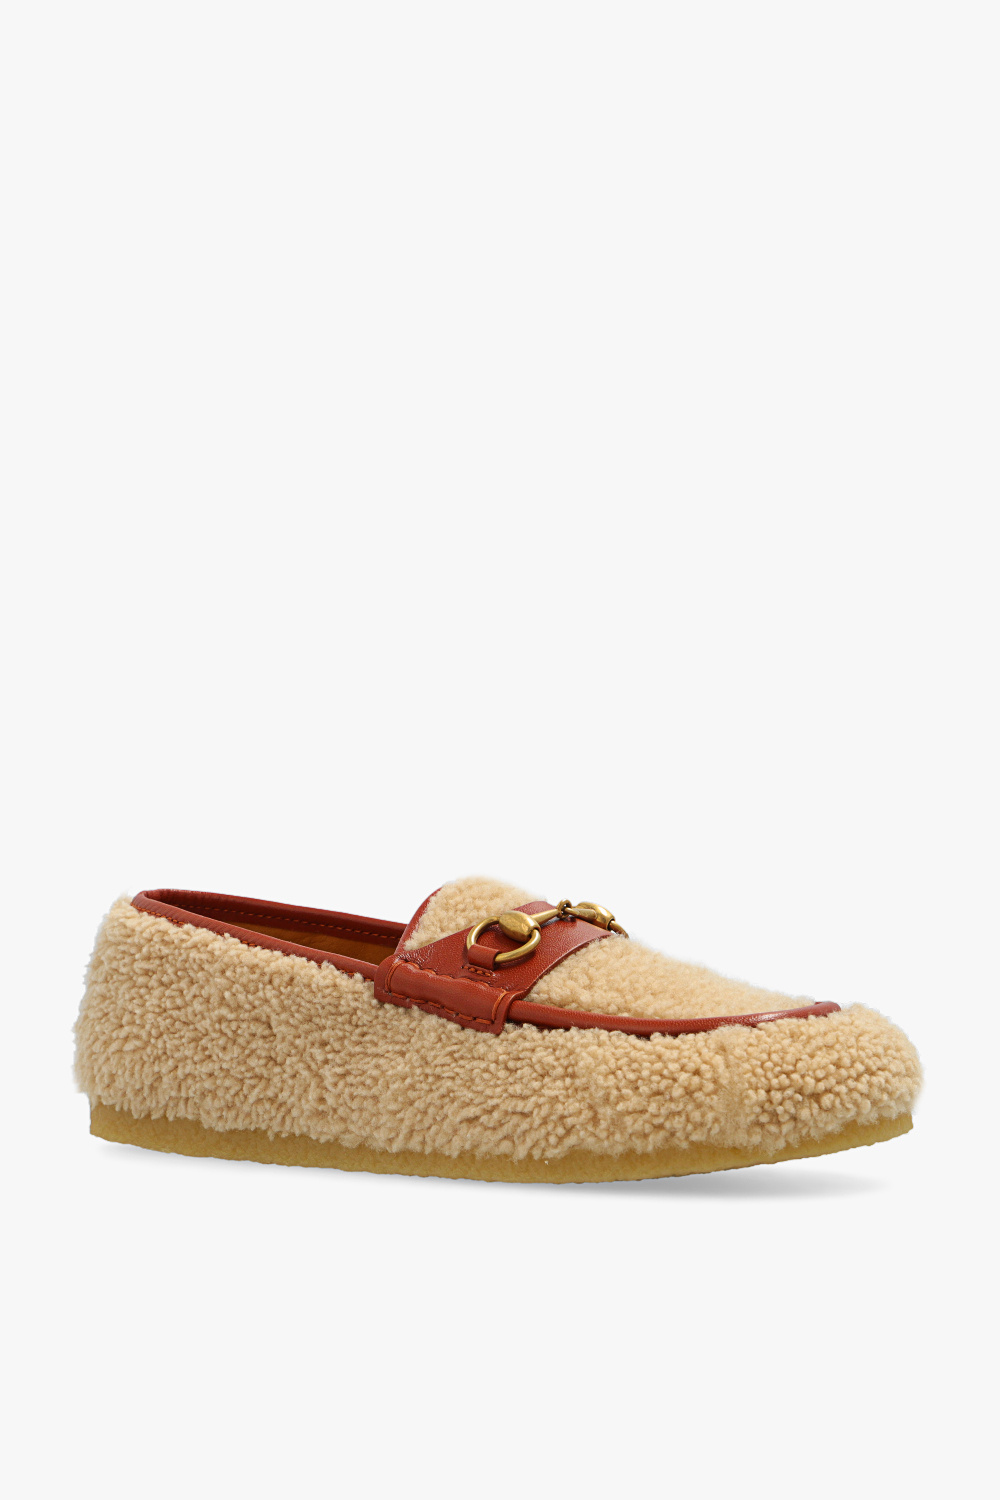 Gucci suede loafers Tee gucci shoes